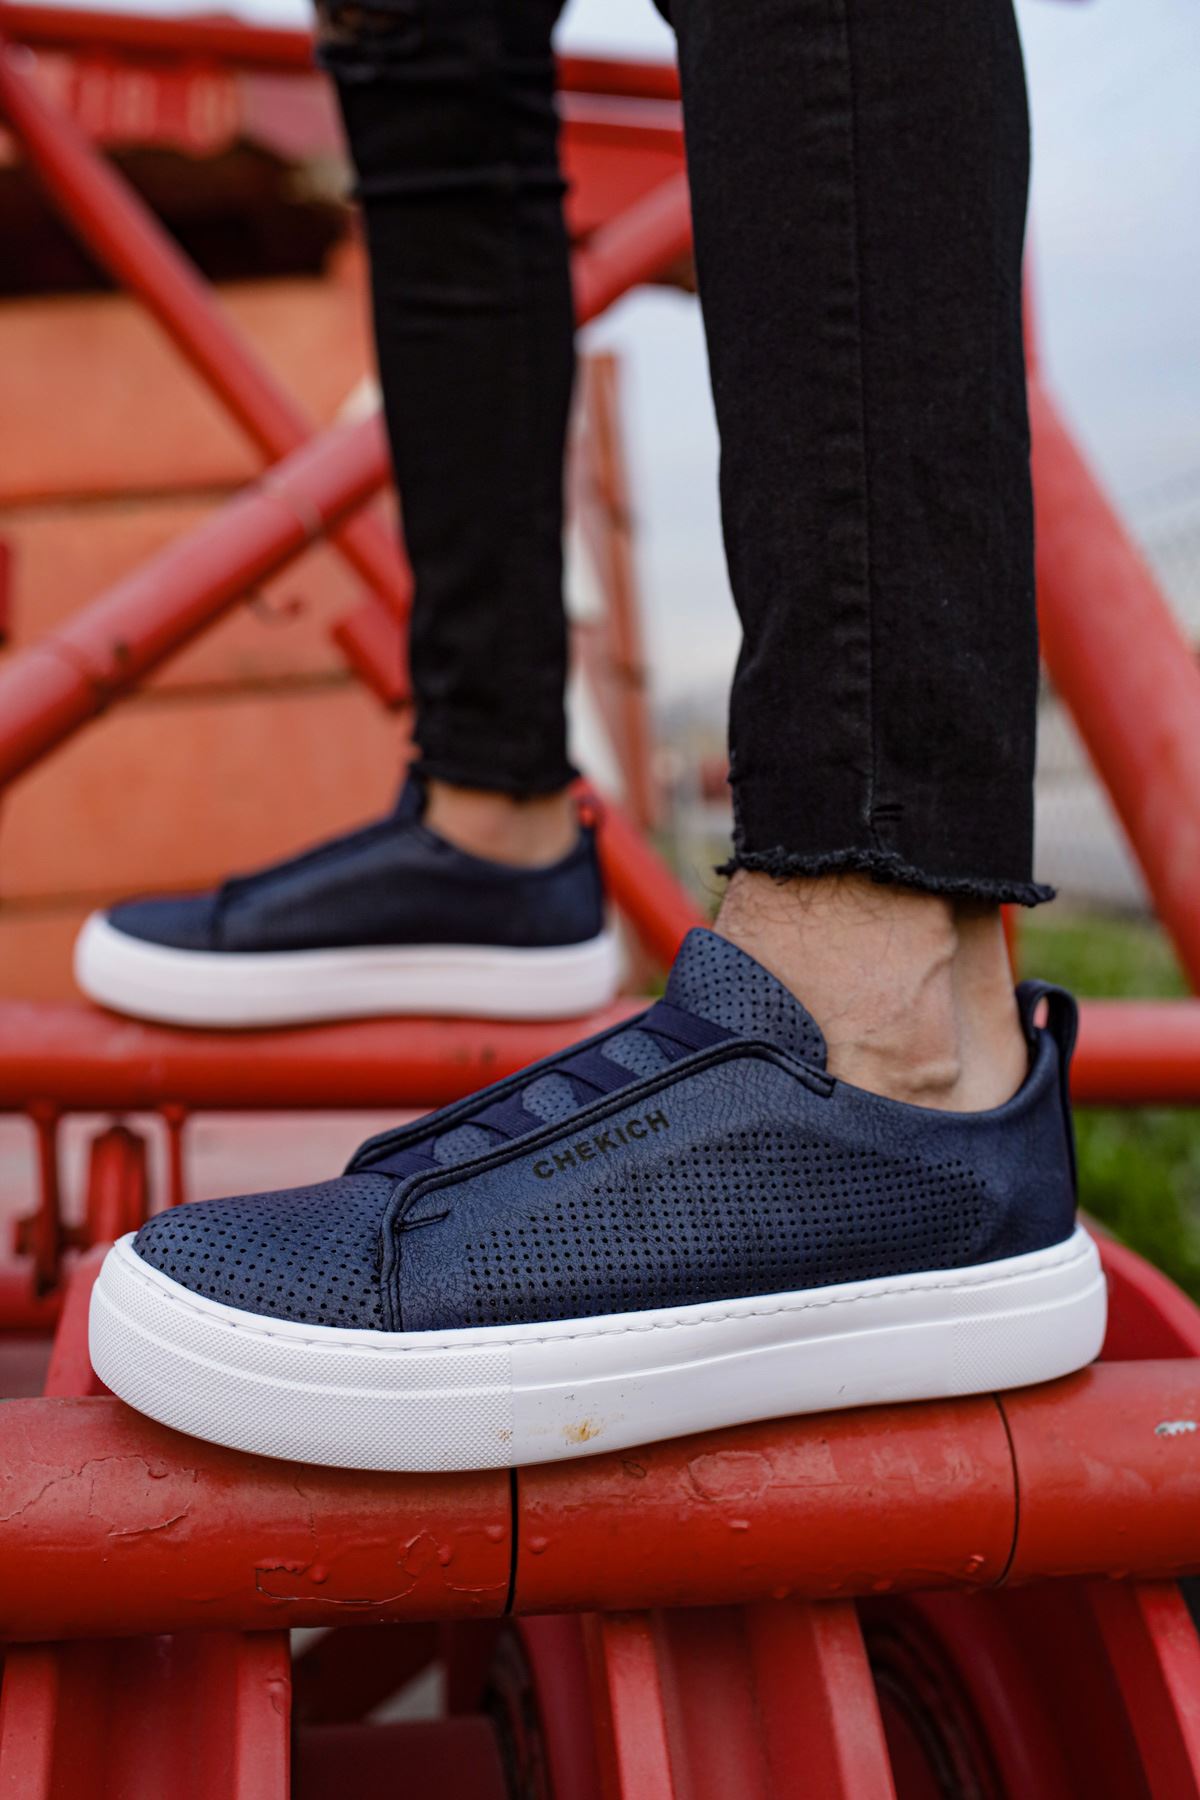 Chekich Men's Shoes Navy Blue Elastic Band Faux Leather Spring & Fall 2021 New Seasons Slip-On Casual Breathable Sneakers Odorless Comfortable Flexible Sewing Base Office Fashion Lightweight Suits Formal CH011 V5